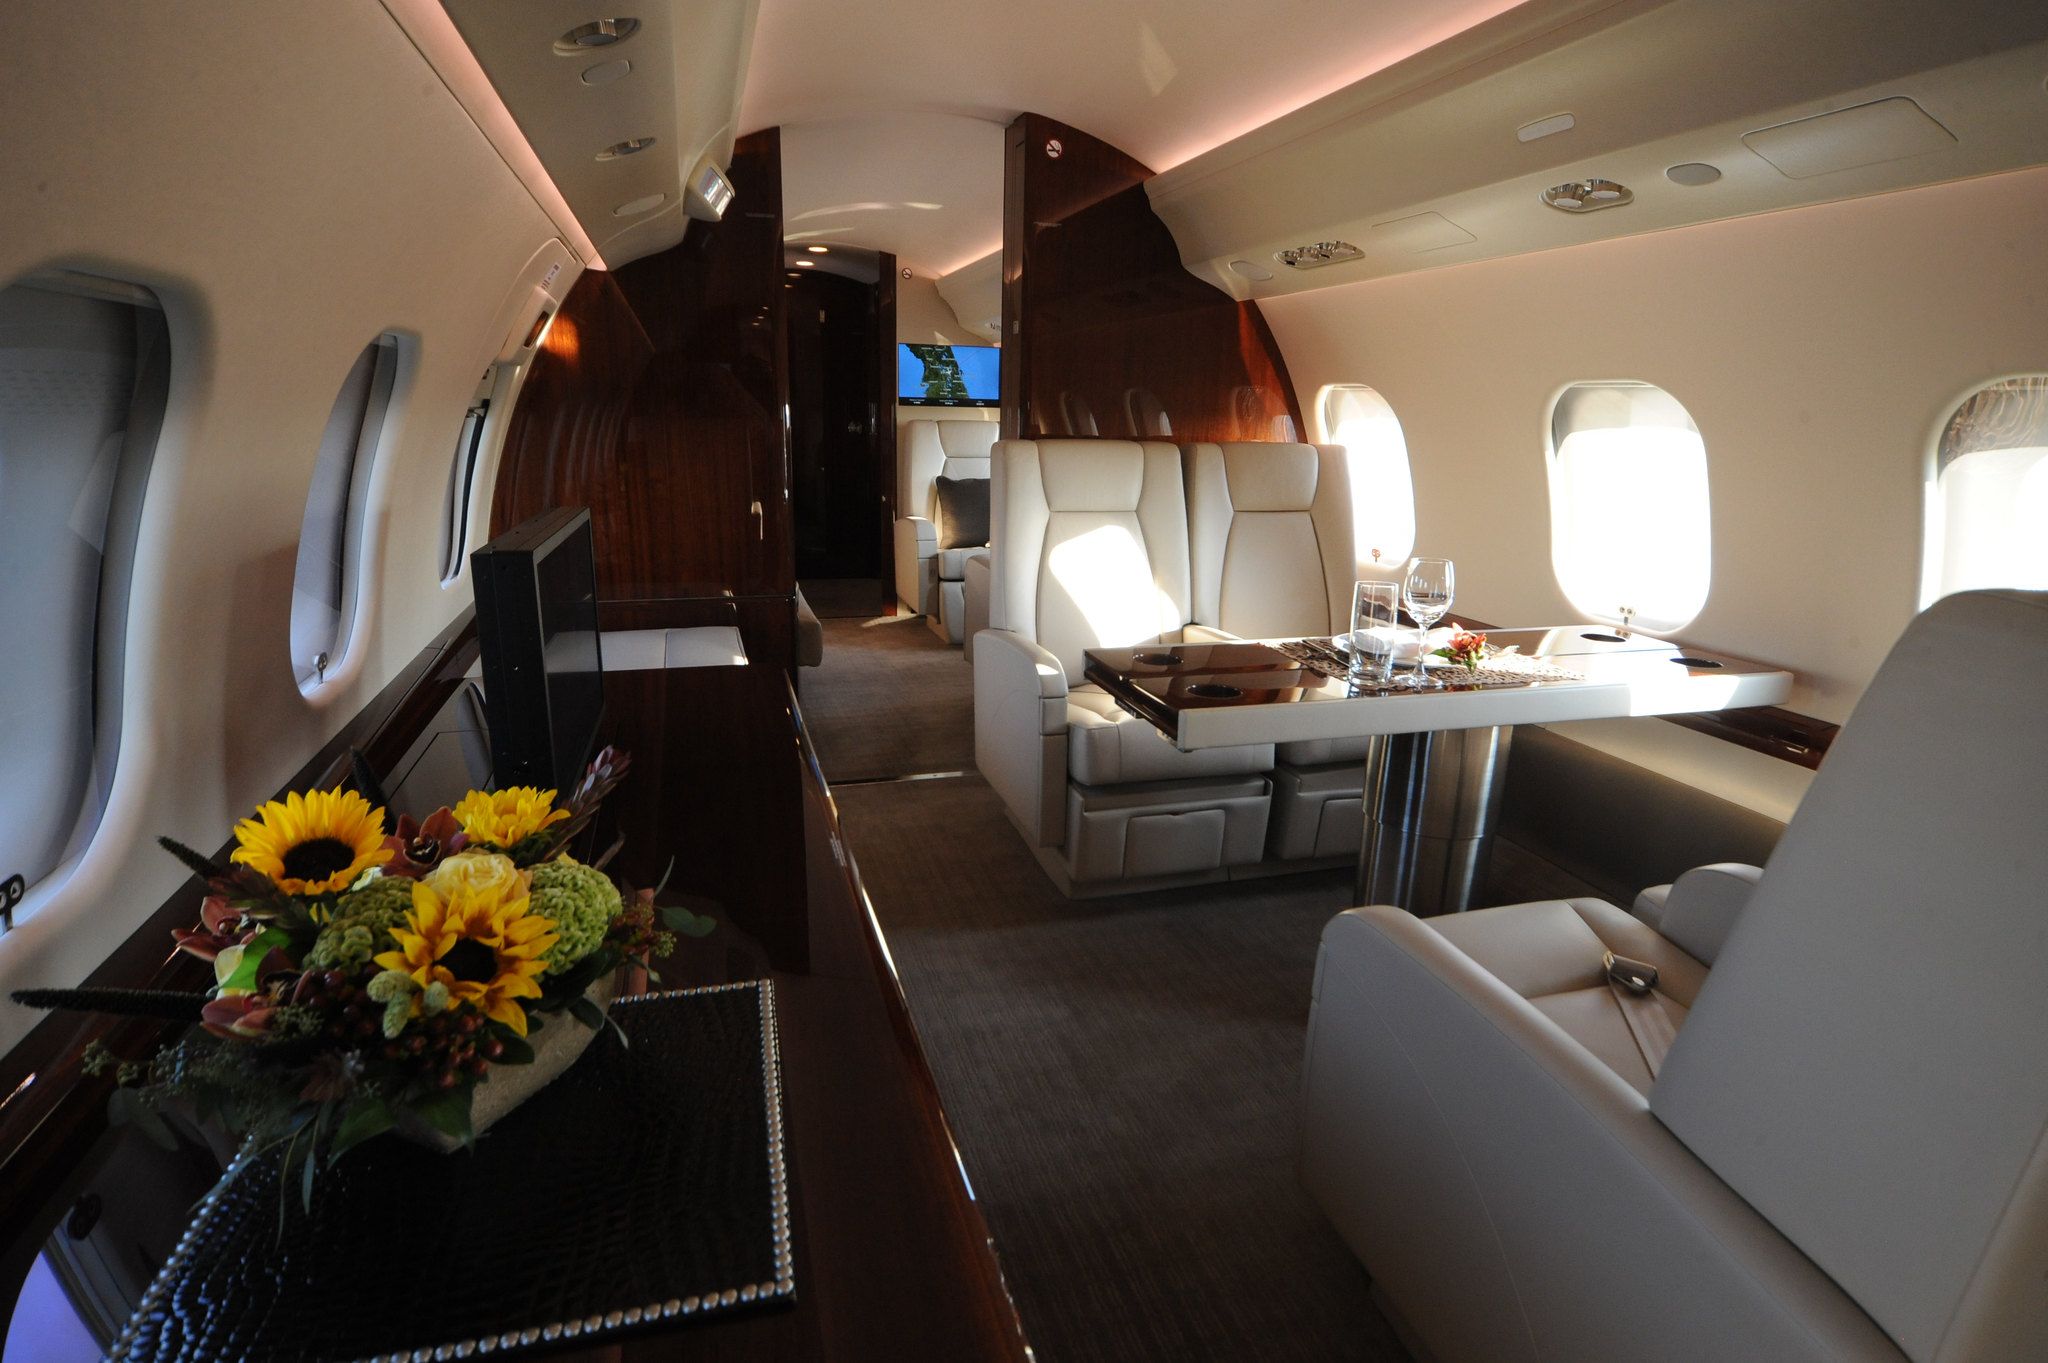 Onboard a Bombardier Global 6000 aircraft.